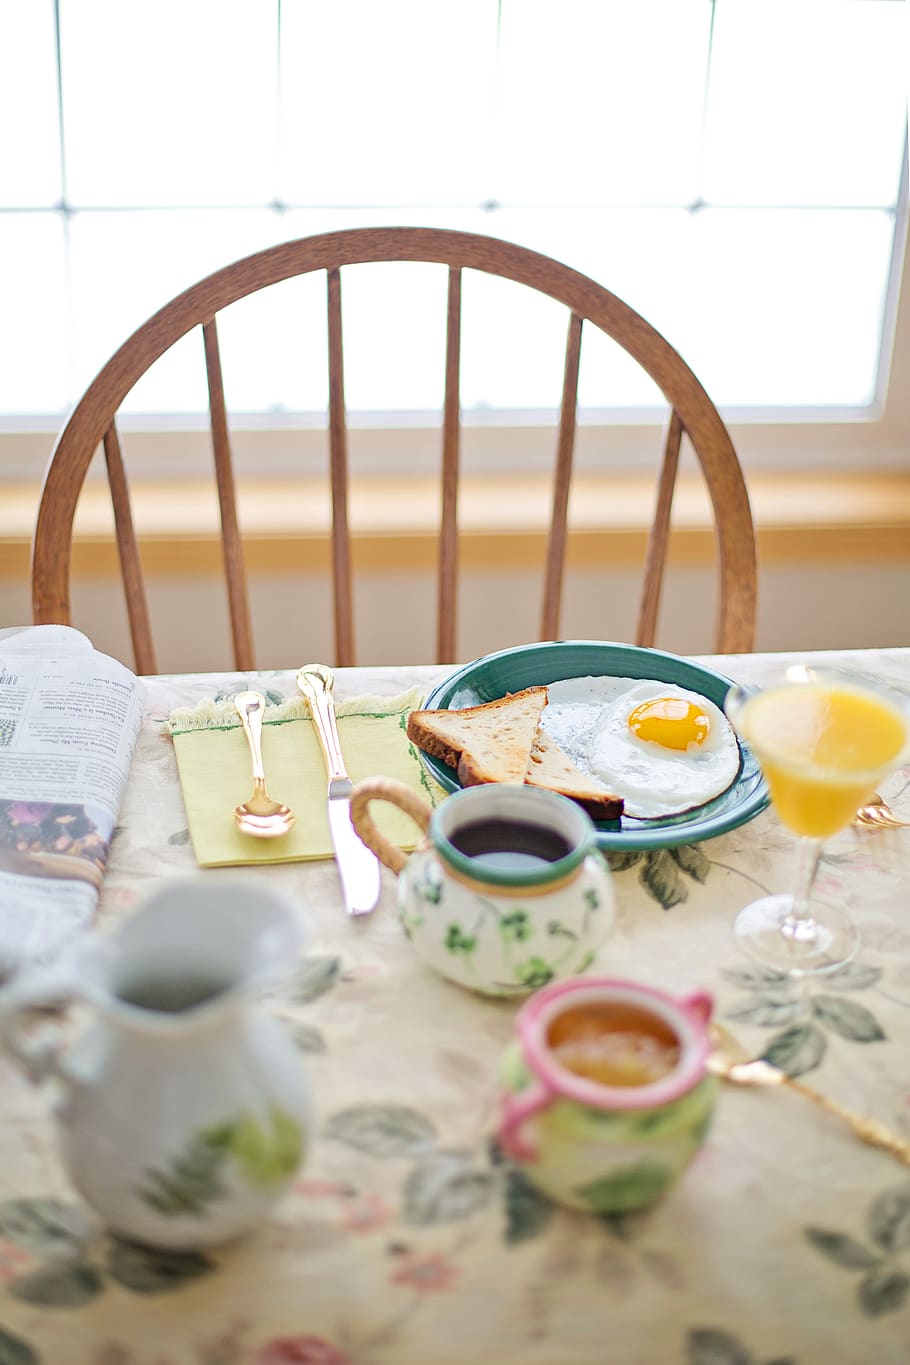 breakfast, fried egg, coffee, table, table setting, food, morning, meal, healthy, protein